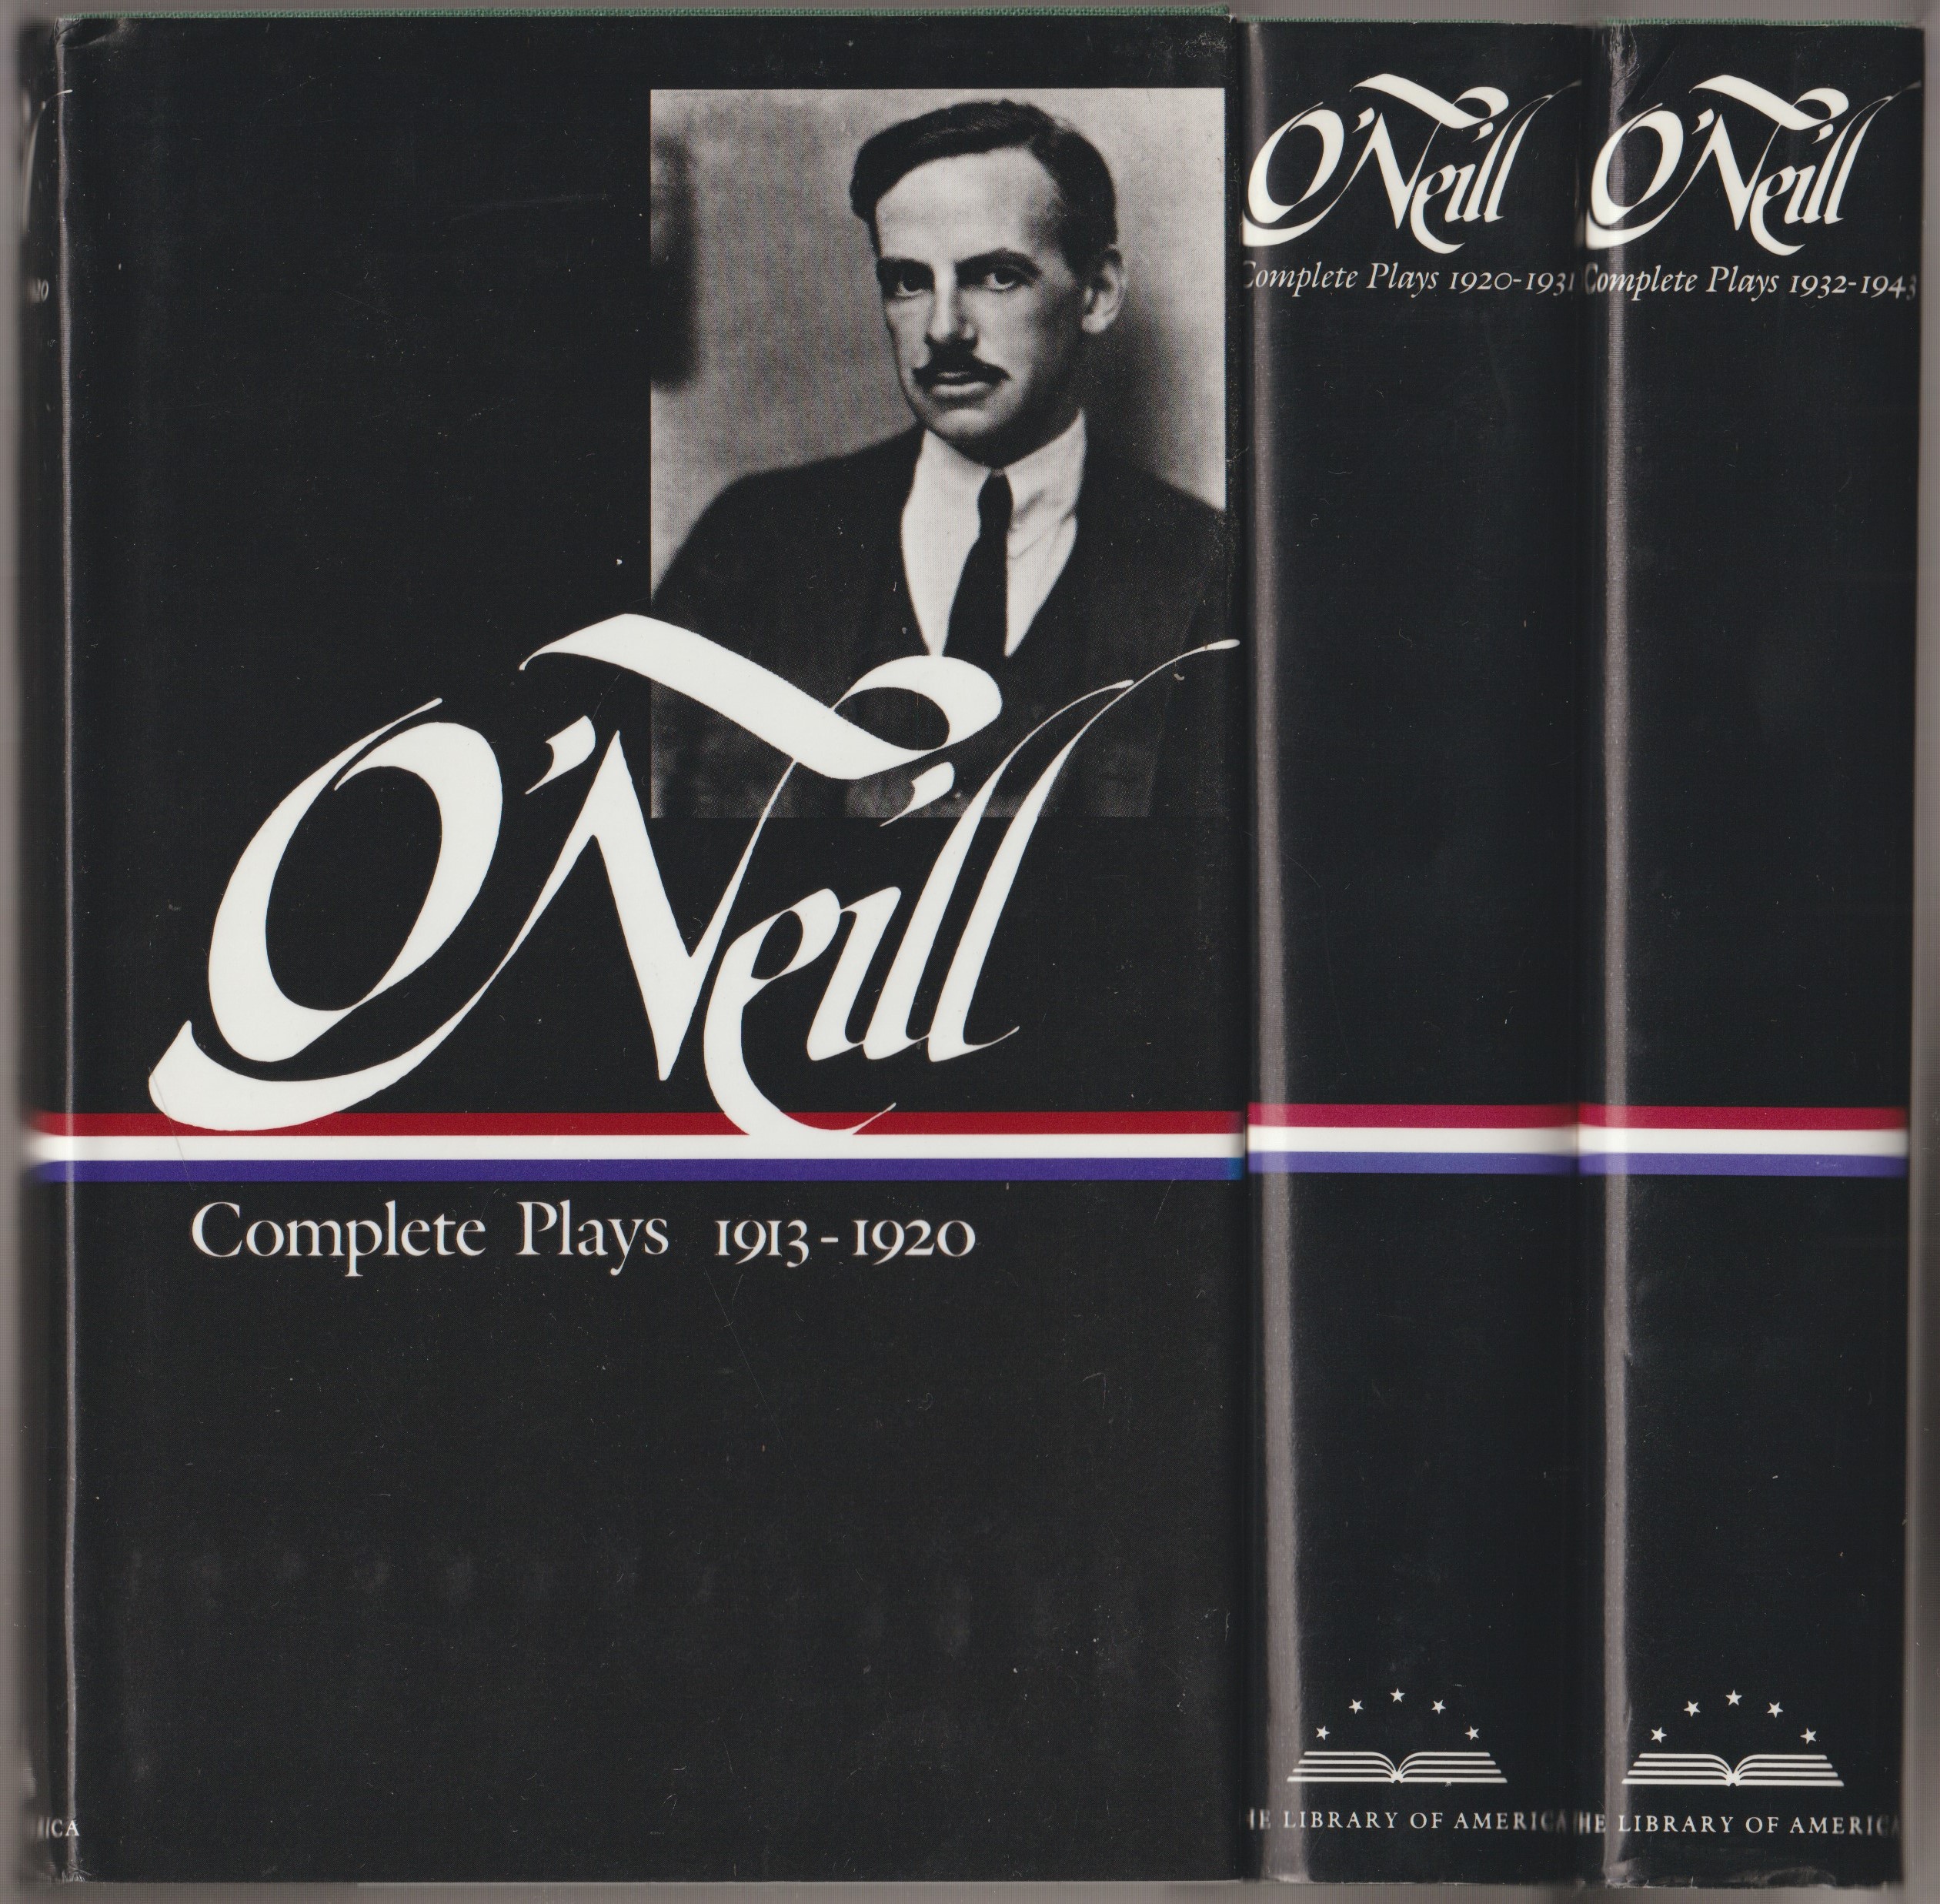 Complete plays, 1913-1943